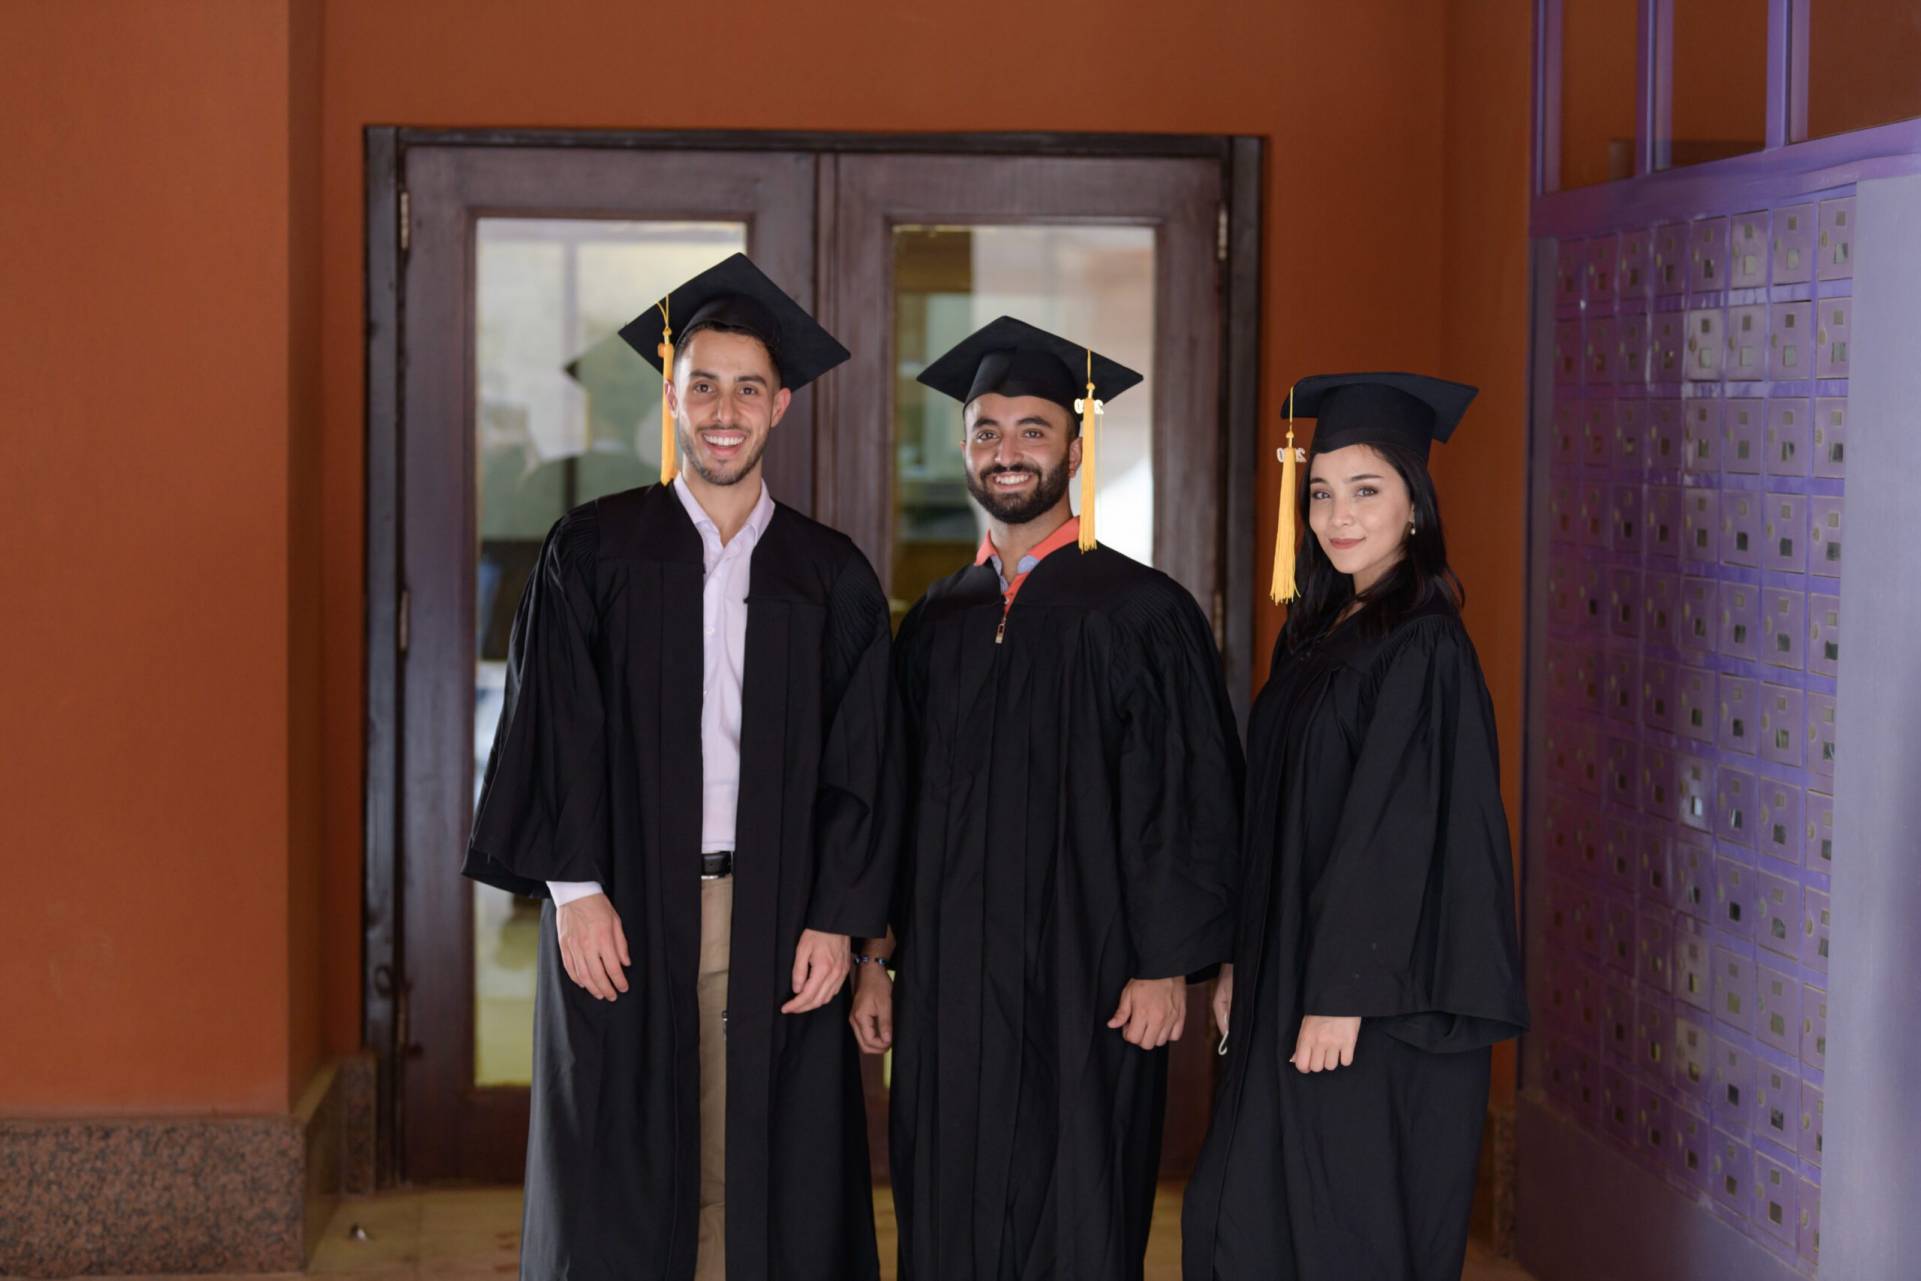 Two male students and one female student dressed in graduation attire smiling.